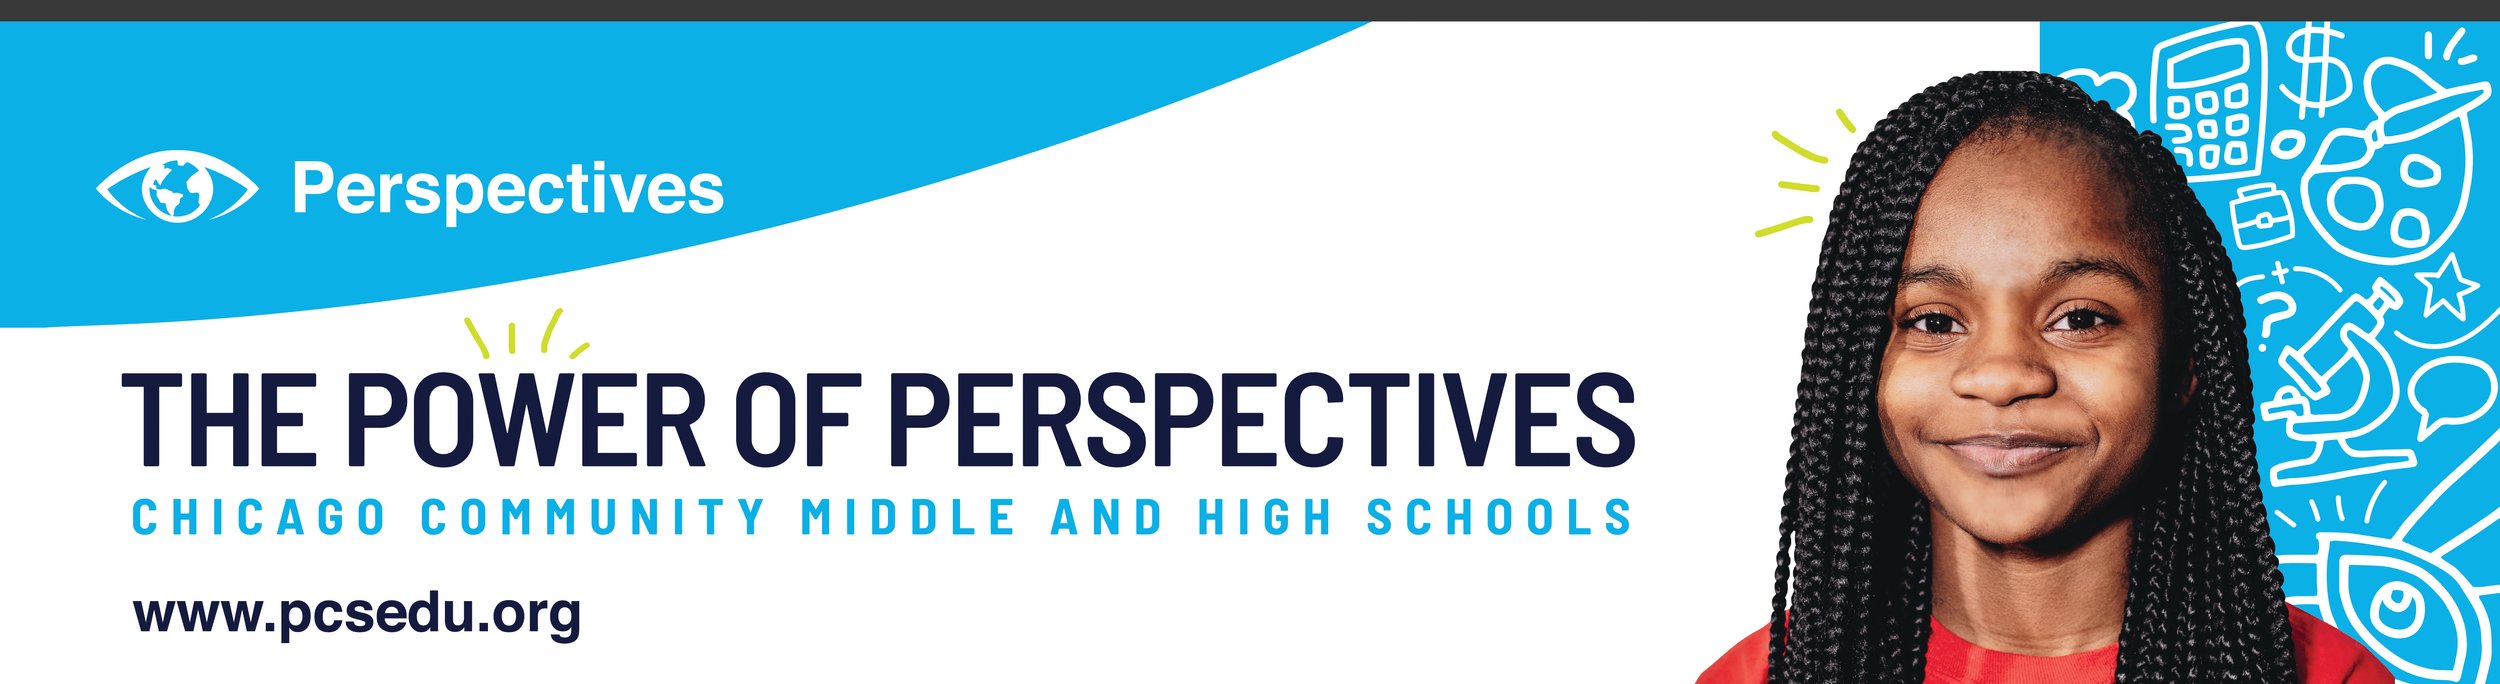 2020 Power of Perspectives Bus Tail-01 copy.jpg